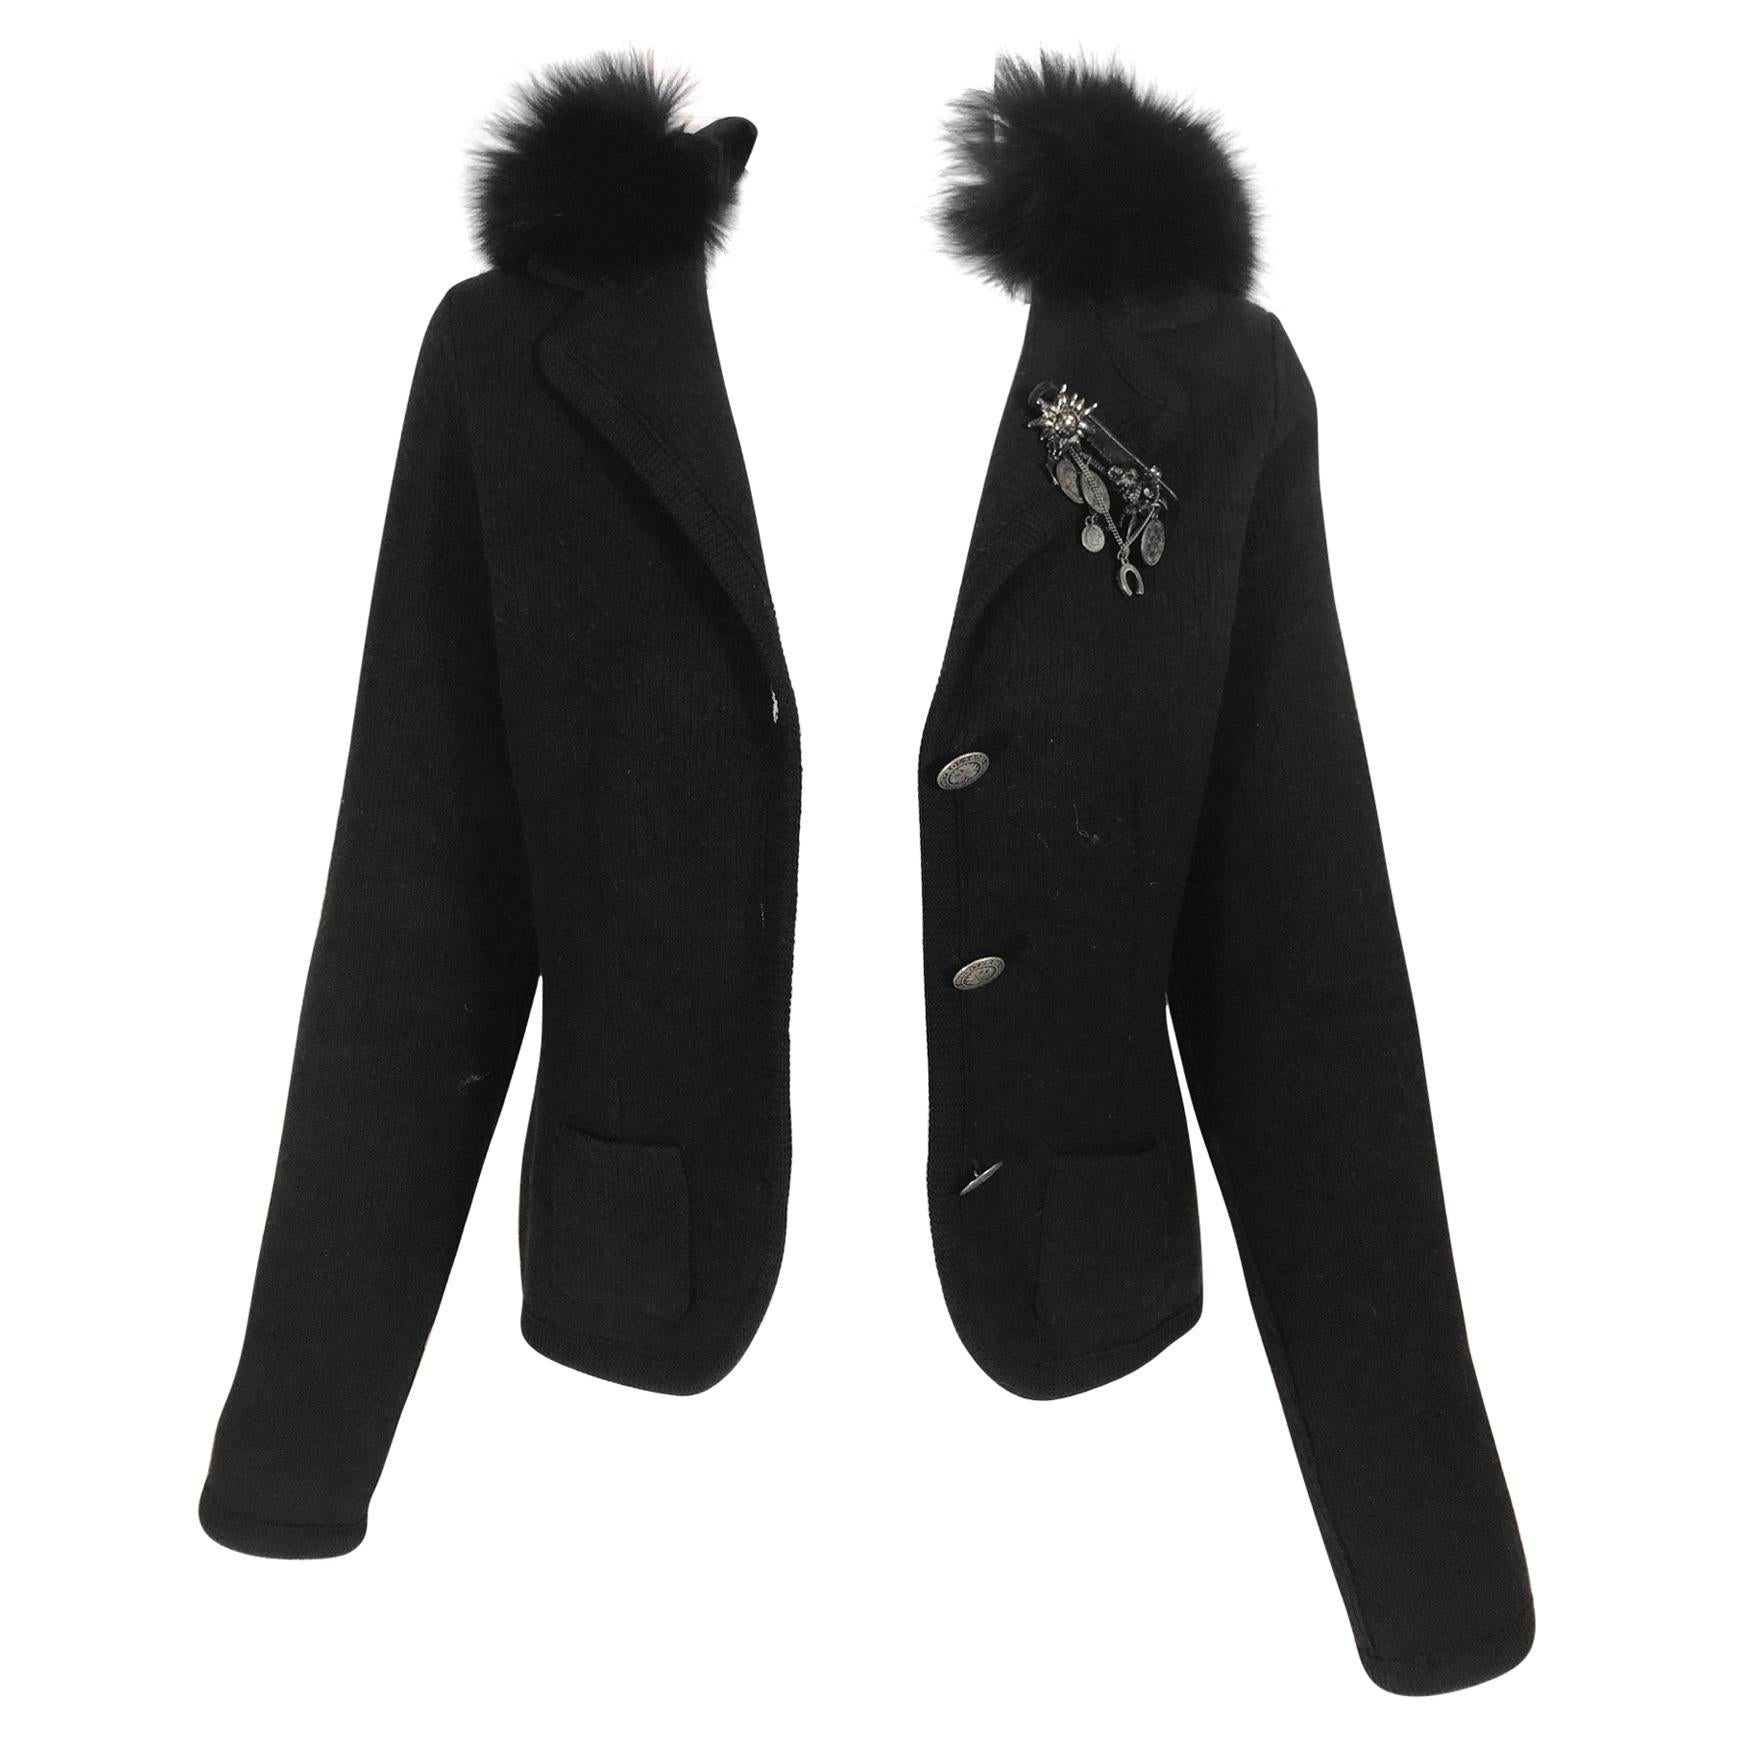 Prada Fur Hooded Knit Sweater For Sale